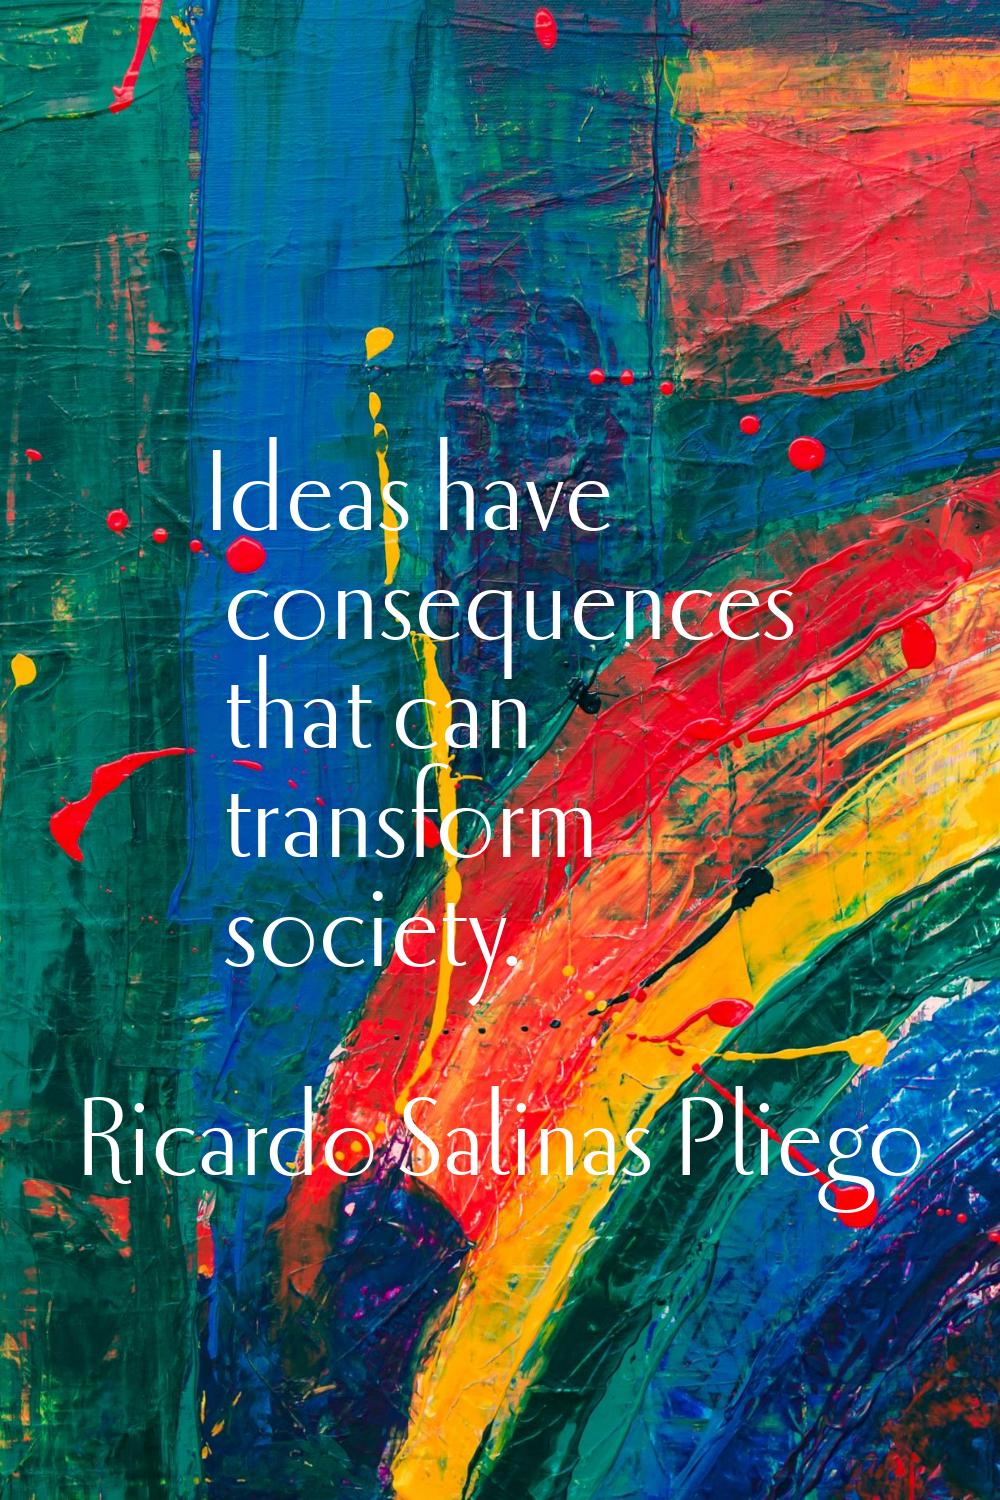 Ideas have consequences that can transform society.